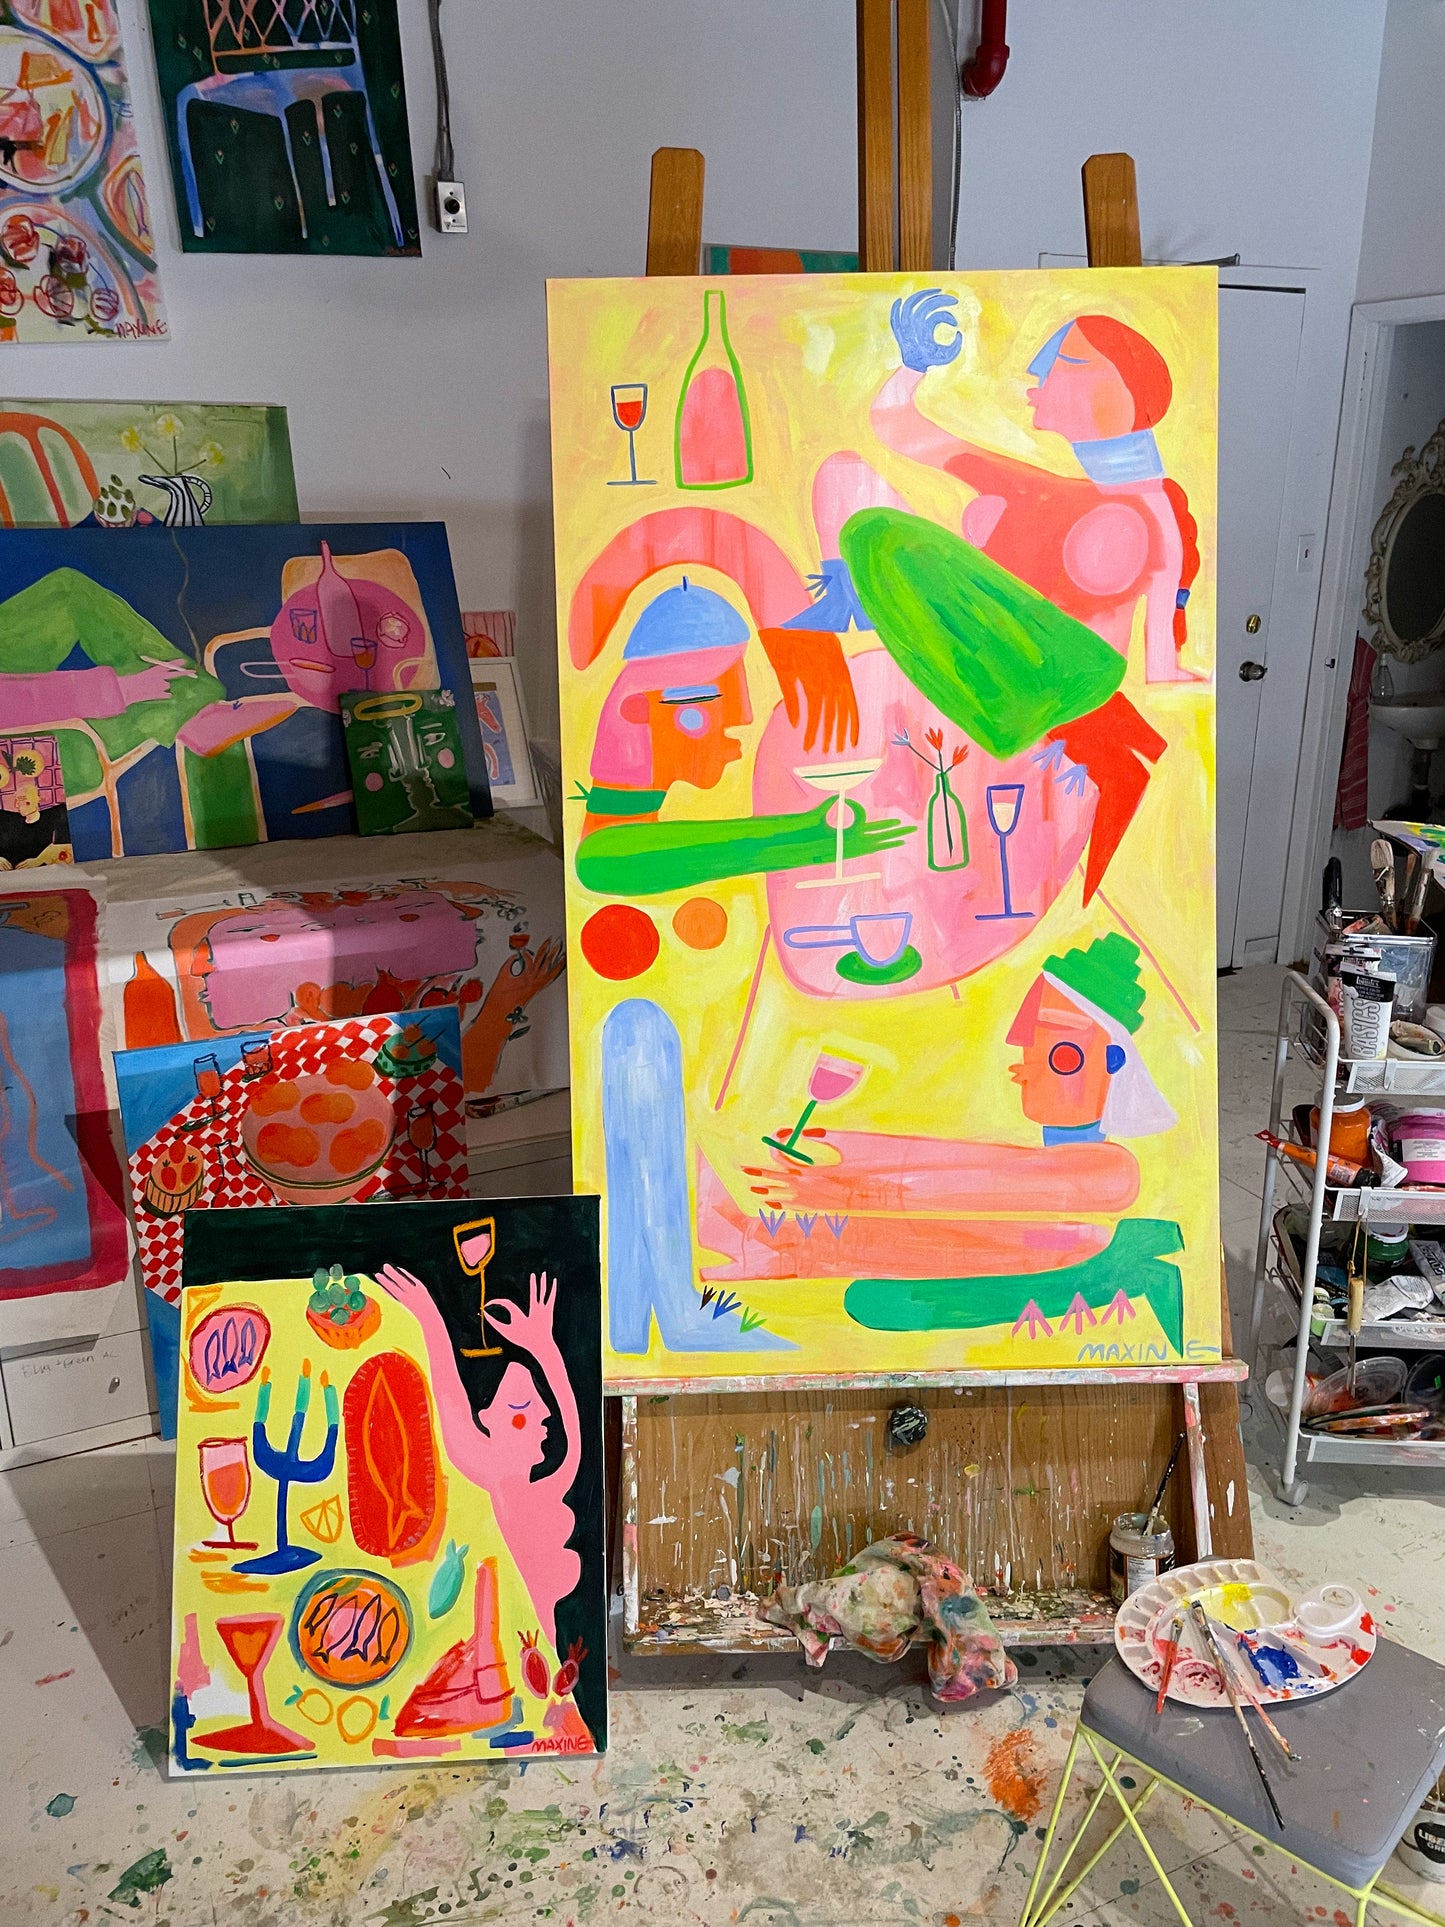 Yellow, green, pink, and blue abstract artwork pictured on an easel